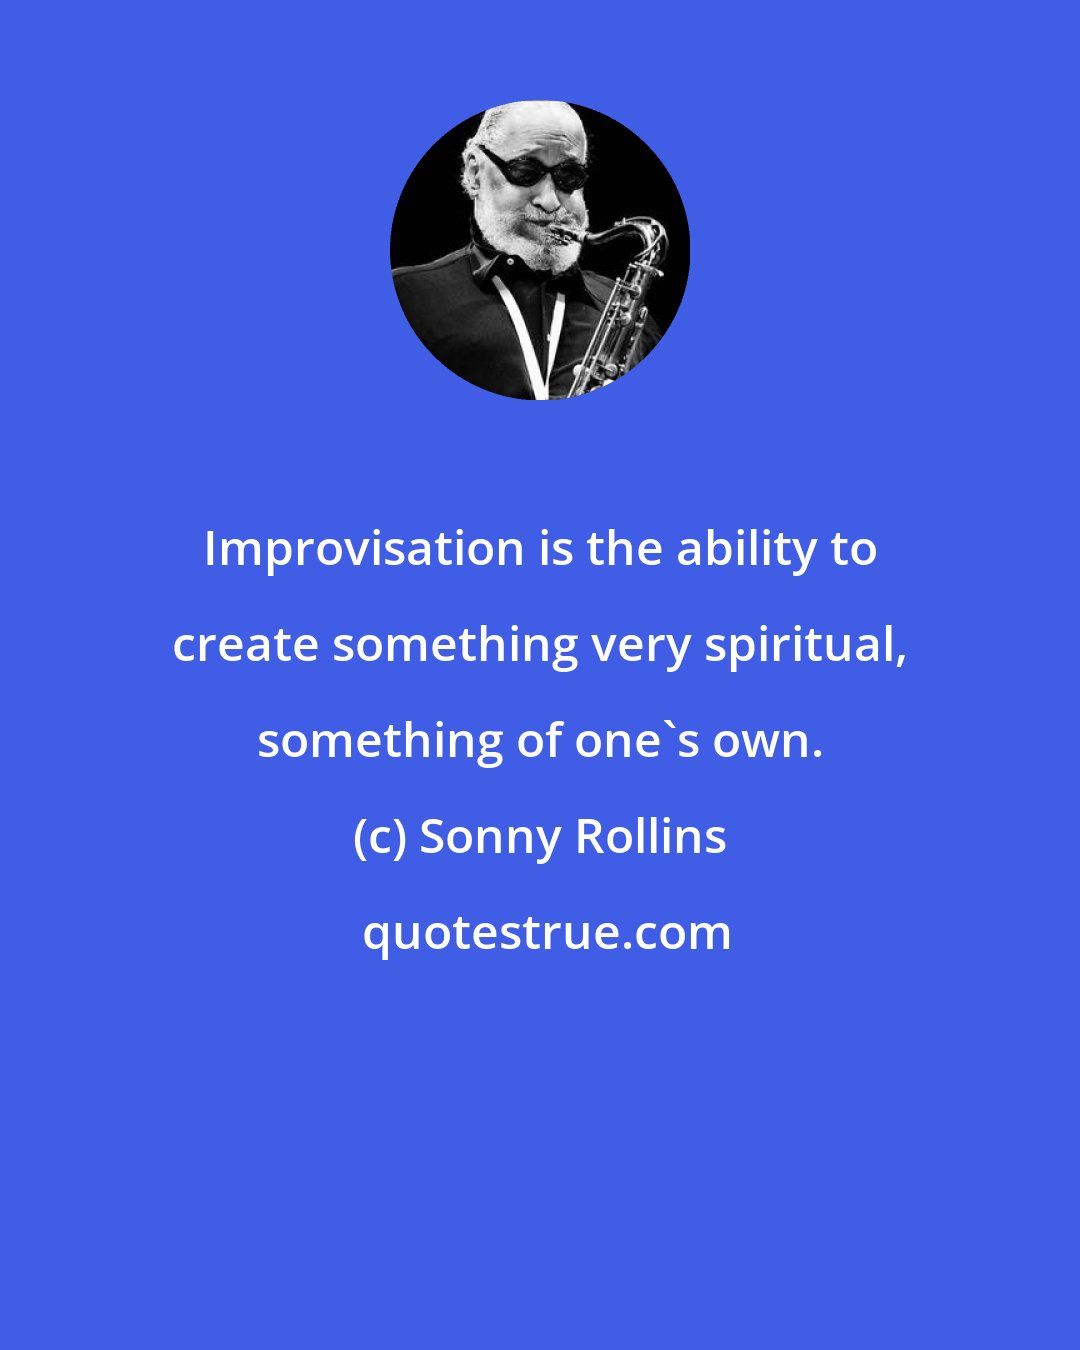 Sonny Rollins: Improvisation is the ability to create something very spiritual, something of one's own.